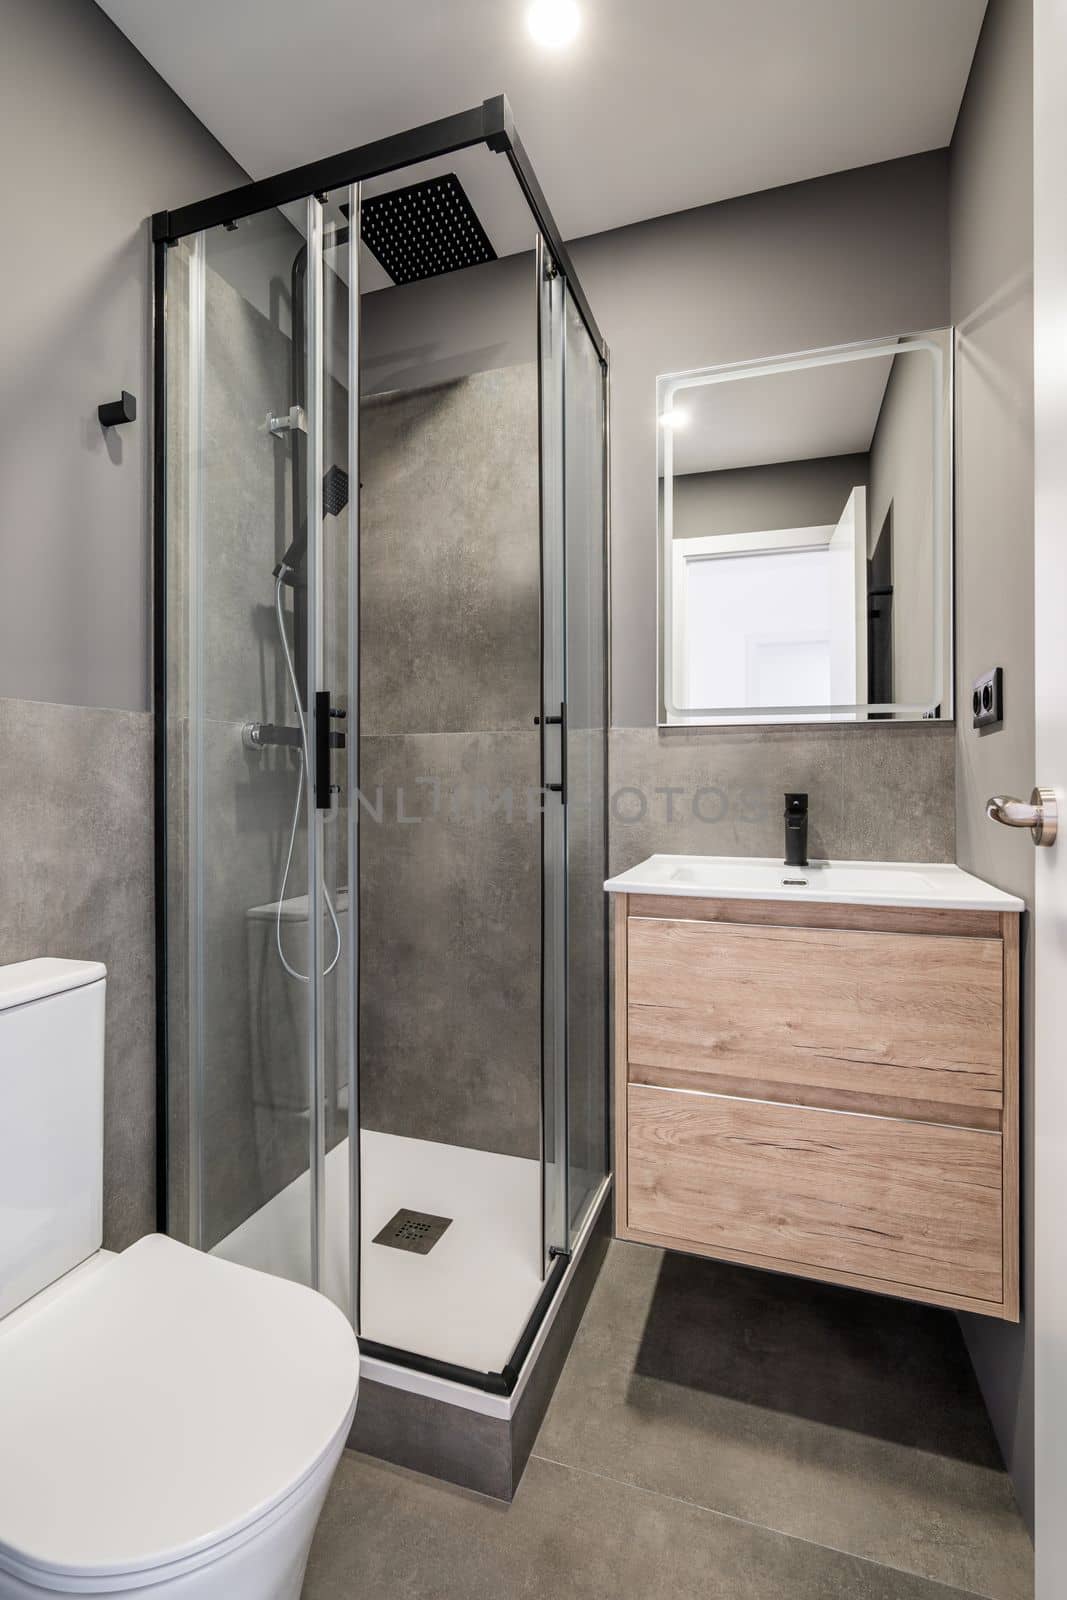 Small bathroom with bright lighting from white ceiling. In corner is shower with glass sliding doors. Toilet bowl and sink in white ceramic. On wall is designer mirror with reflection of front door. by apavlin